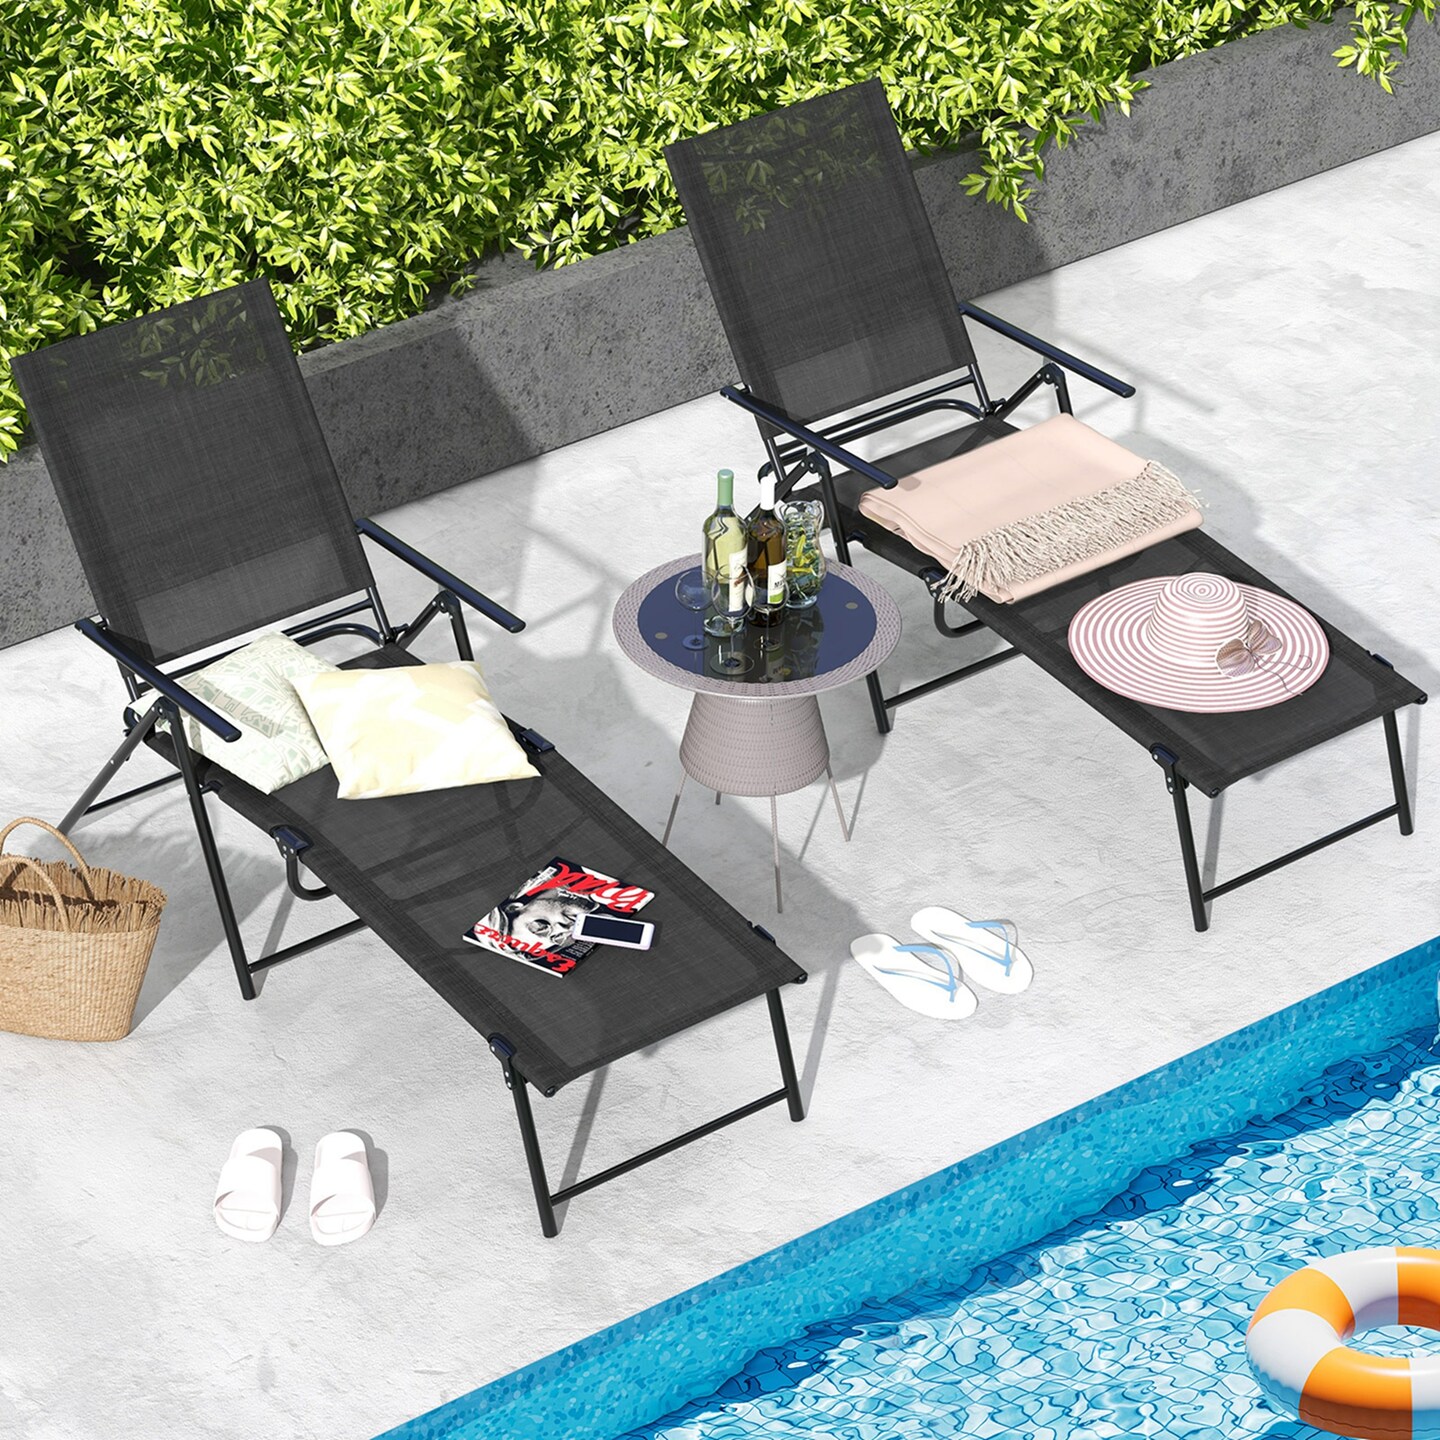 Costway 2 Piece Patio Folding Chaise Lounge Chairs with 6-Level Backrest Reclining Chairs Tan/Black/Grey